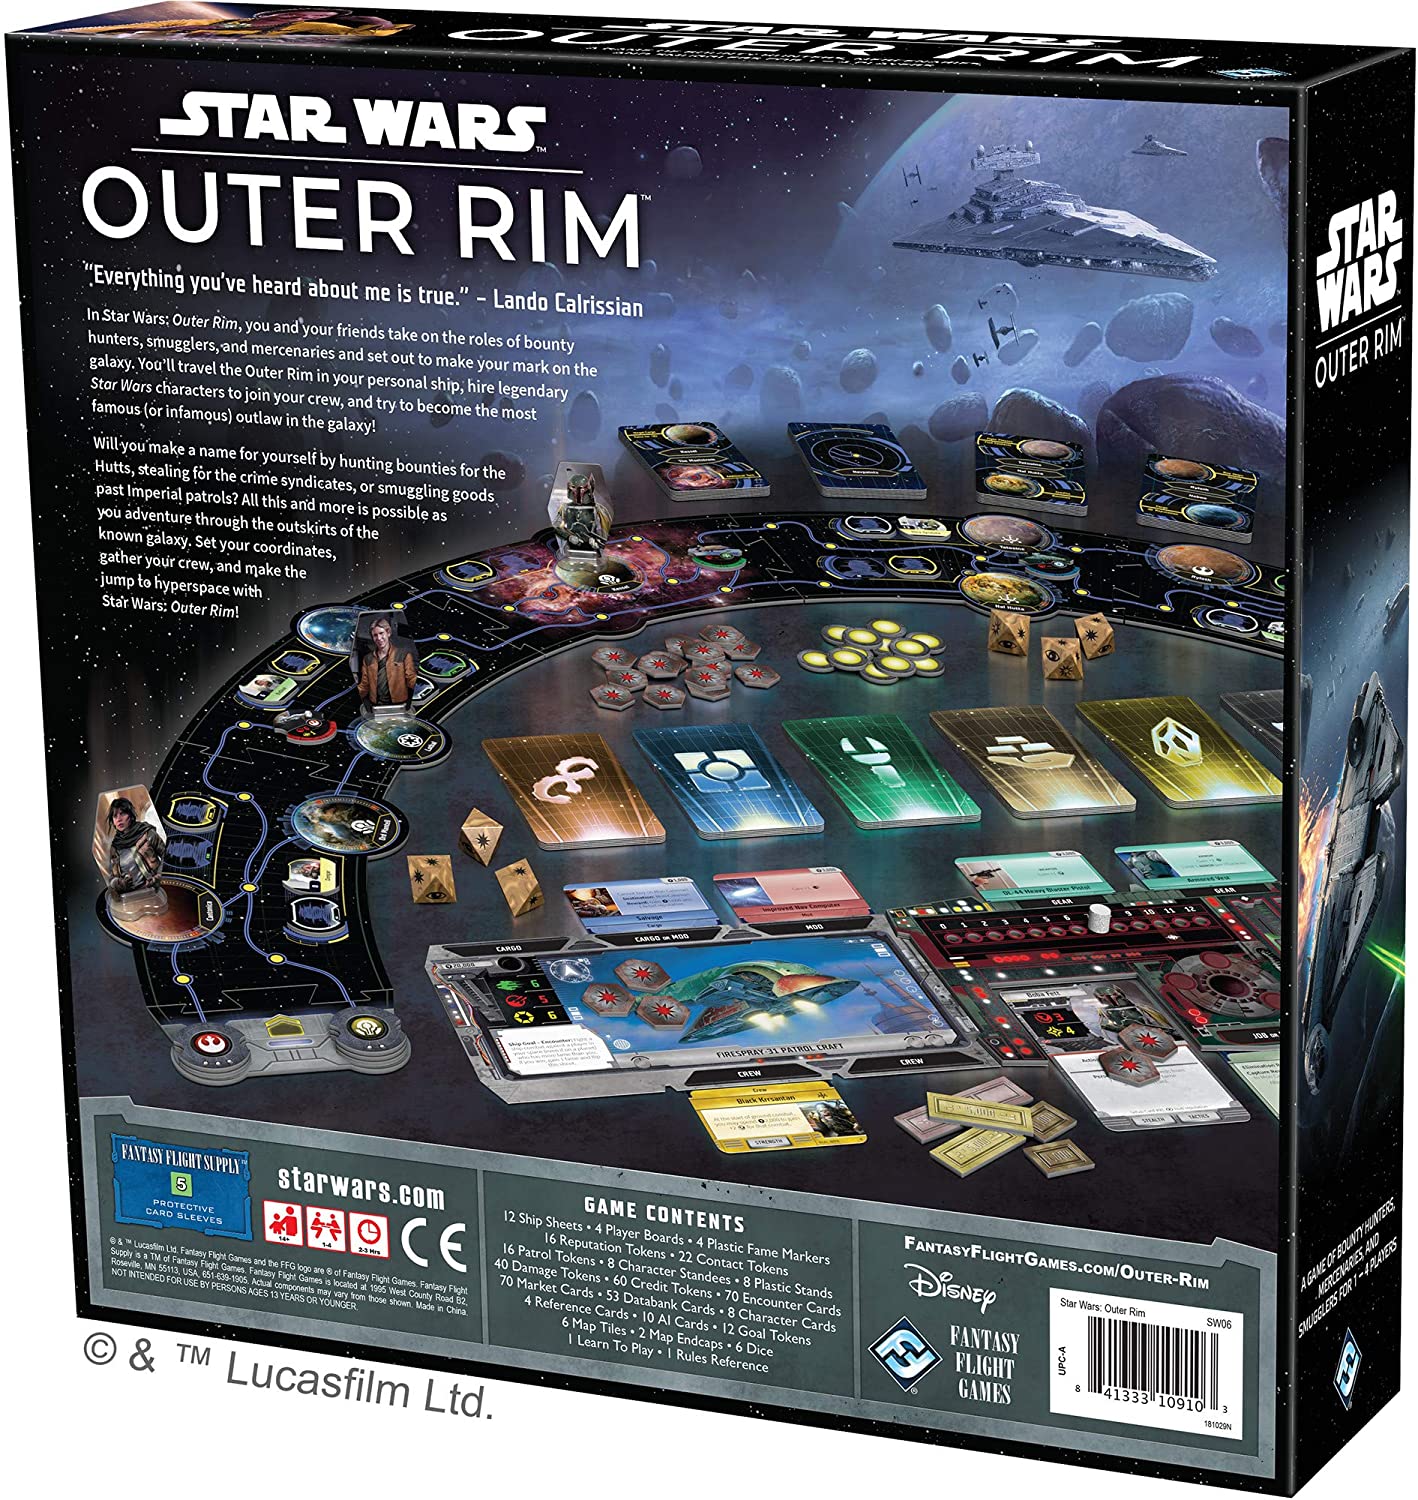 Find out about Star Wars: Outer Rim